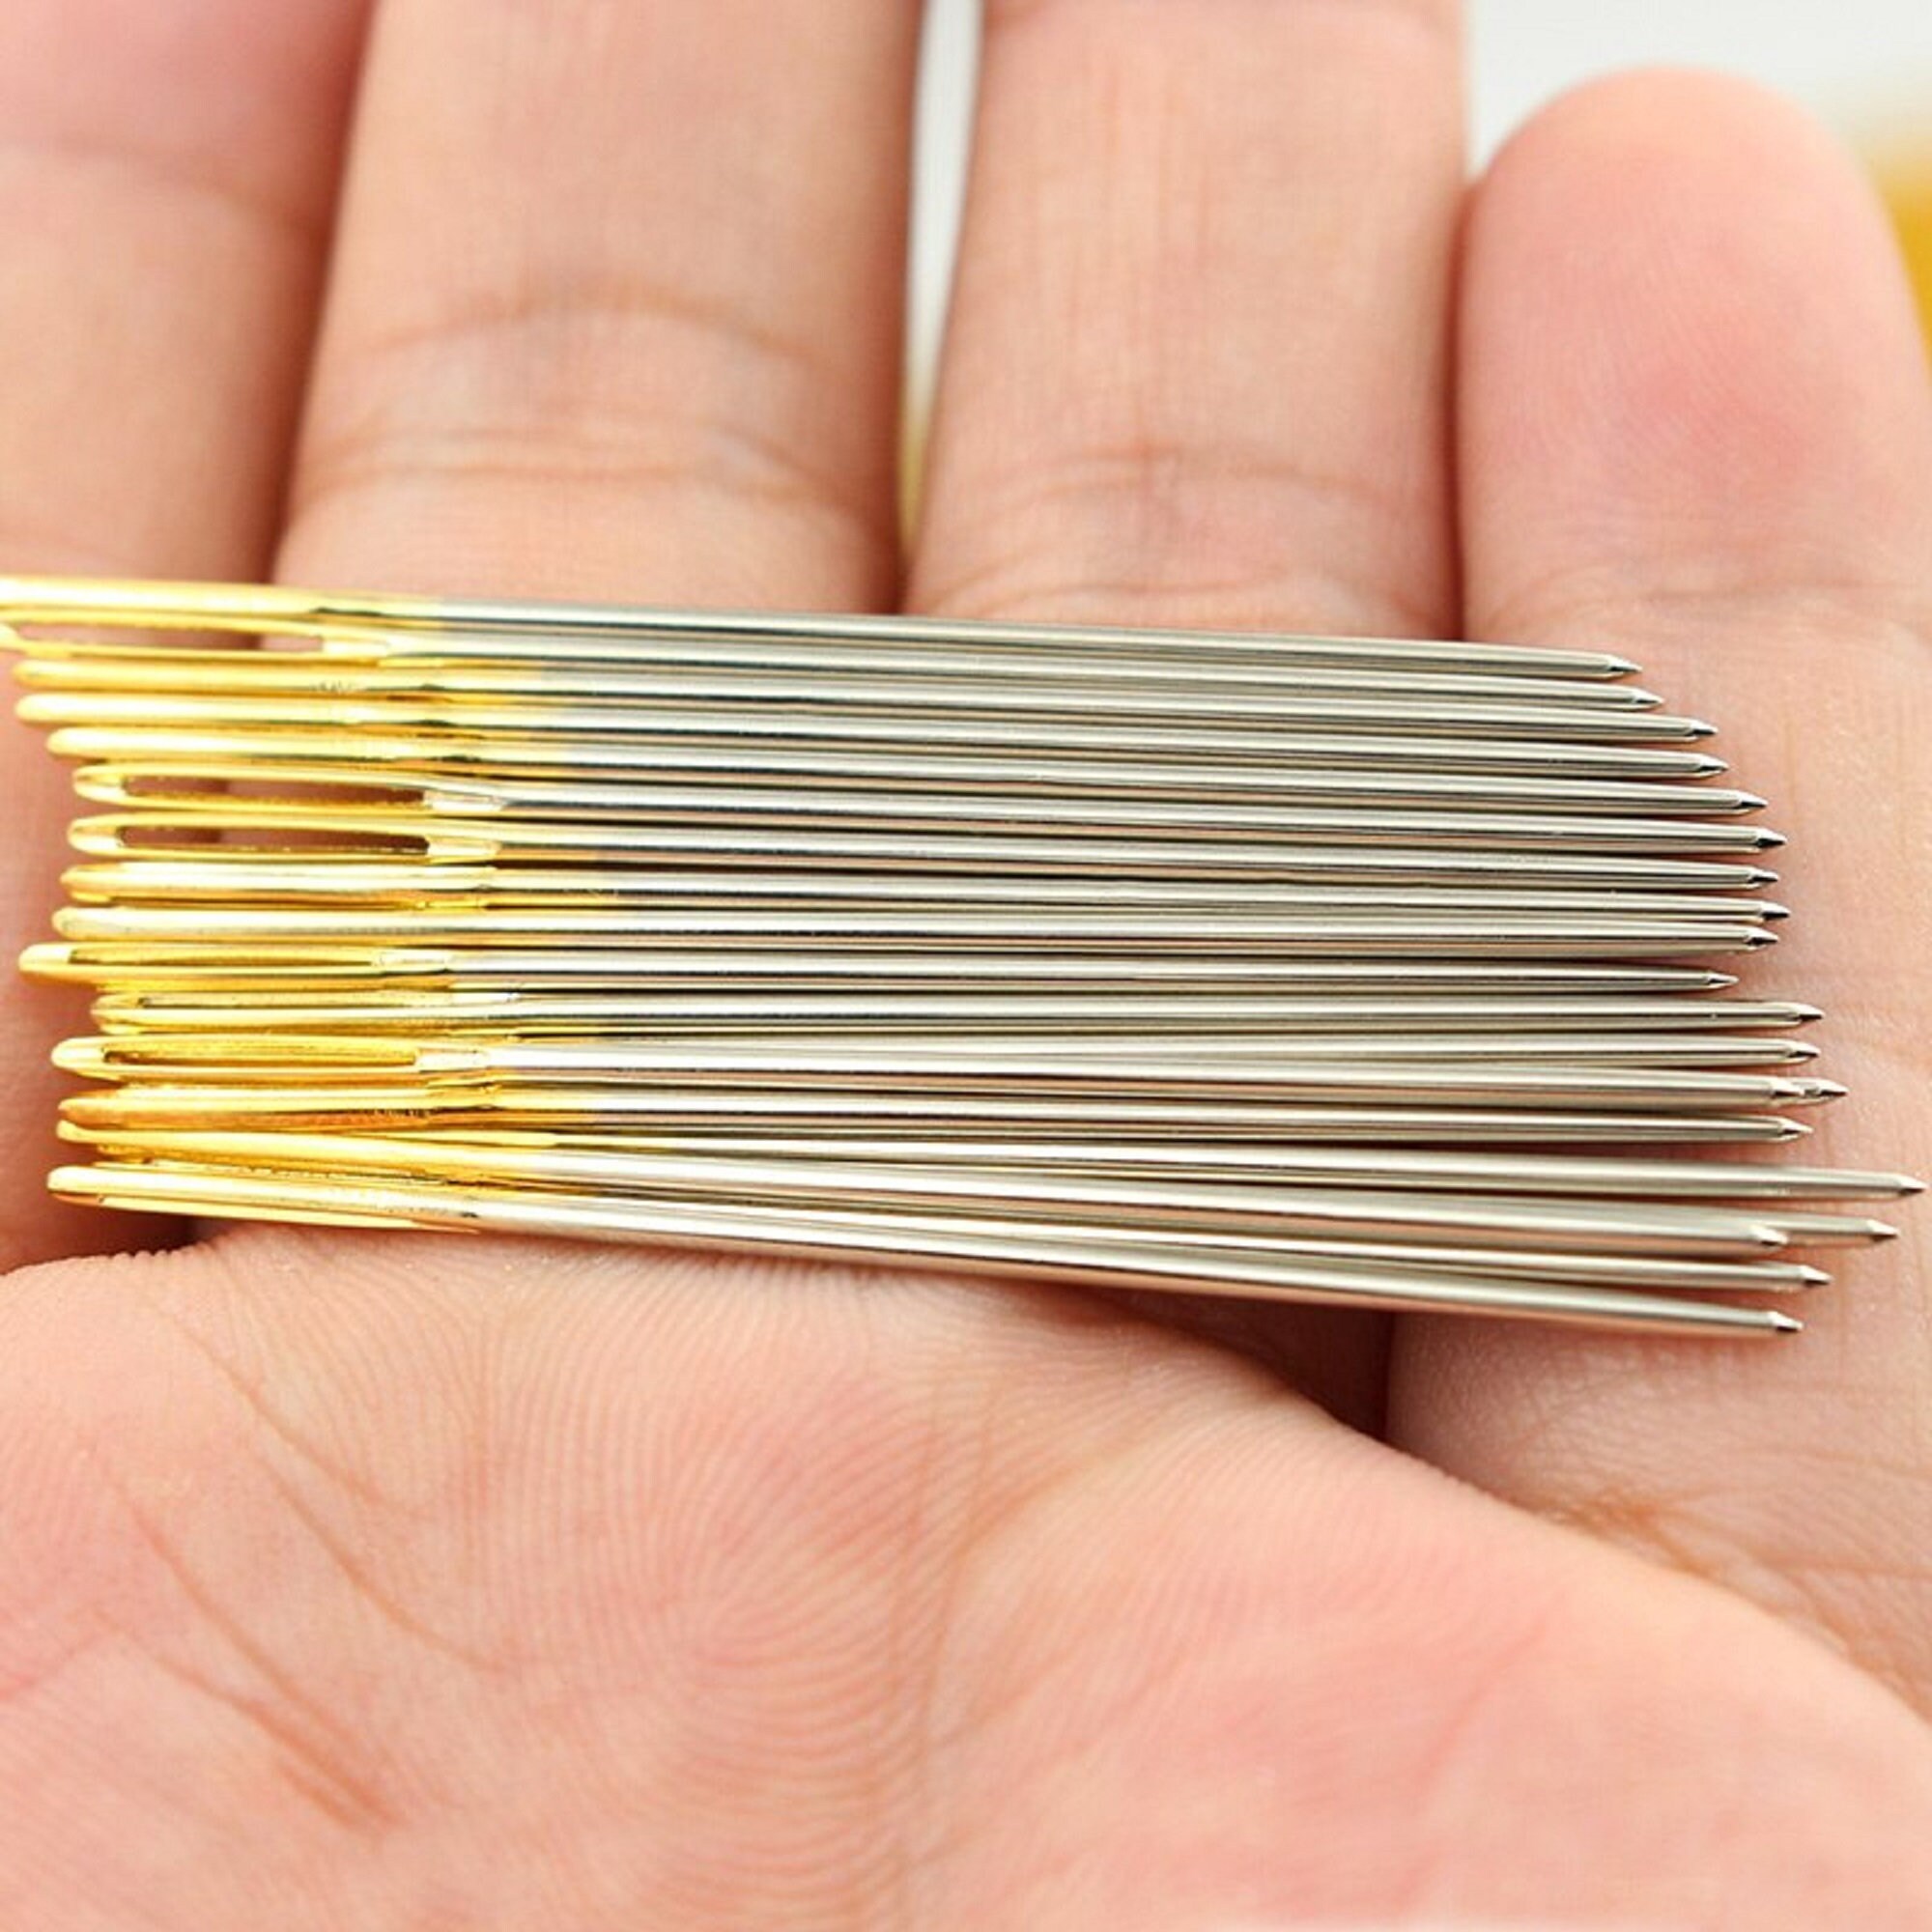 Leather Crafts Sewing Needle,Round Head Blunt Pint,Pointed Prism Sharp Tool  for Embroidery Stitching Gold Tail Big Eye Needles